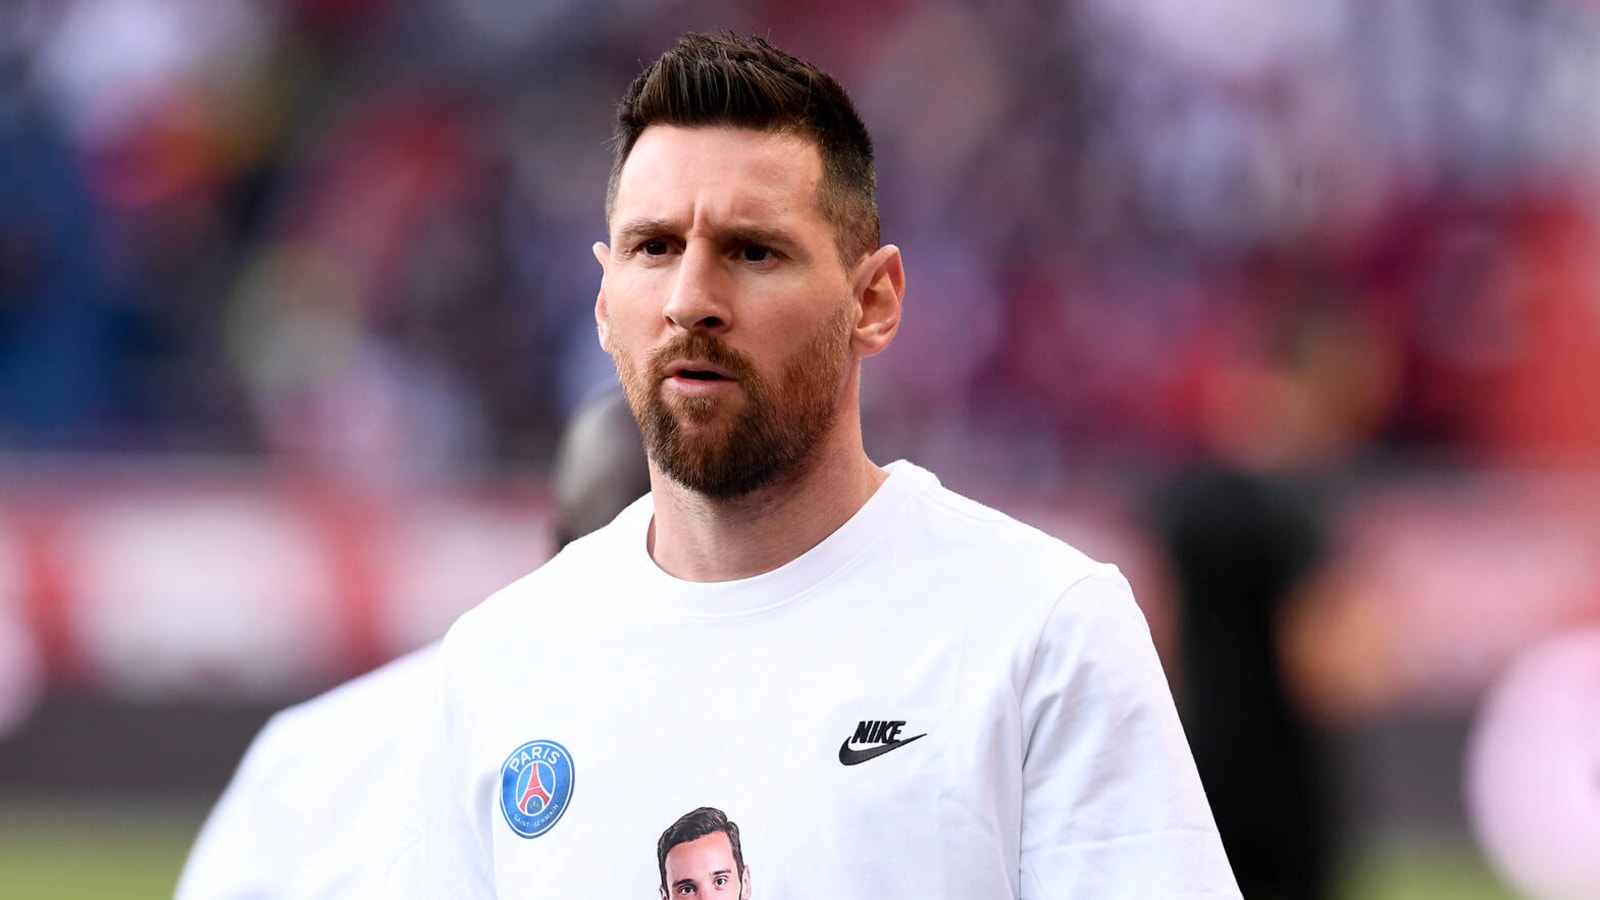 Watch: Lionel Messi booed before his final PSG appearance